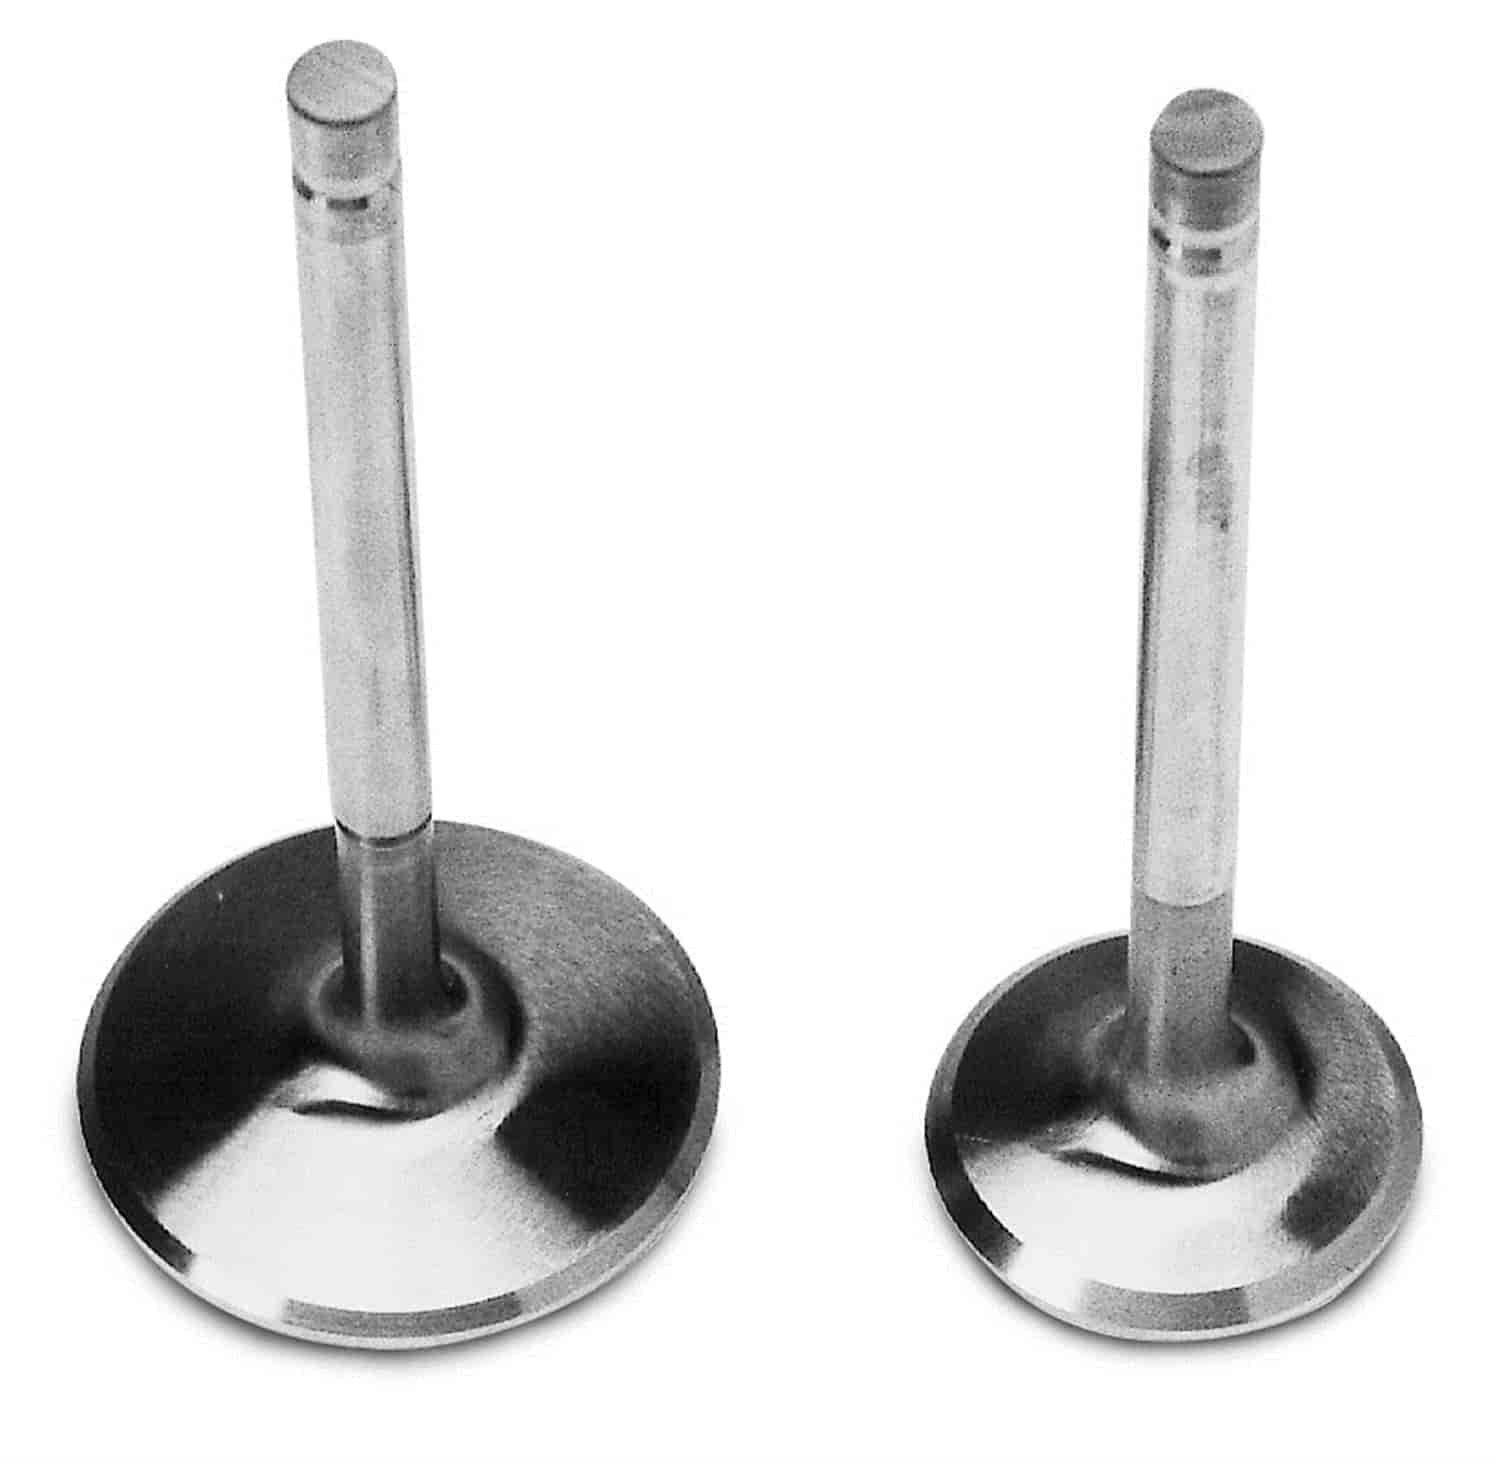 Exhaust Valve Set 1.76" for Big Block Ford Performer RPM Heads #350-60669, & 350-60689